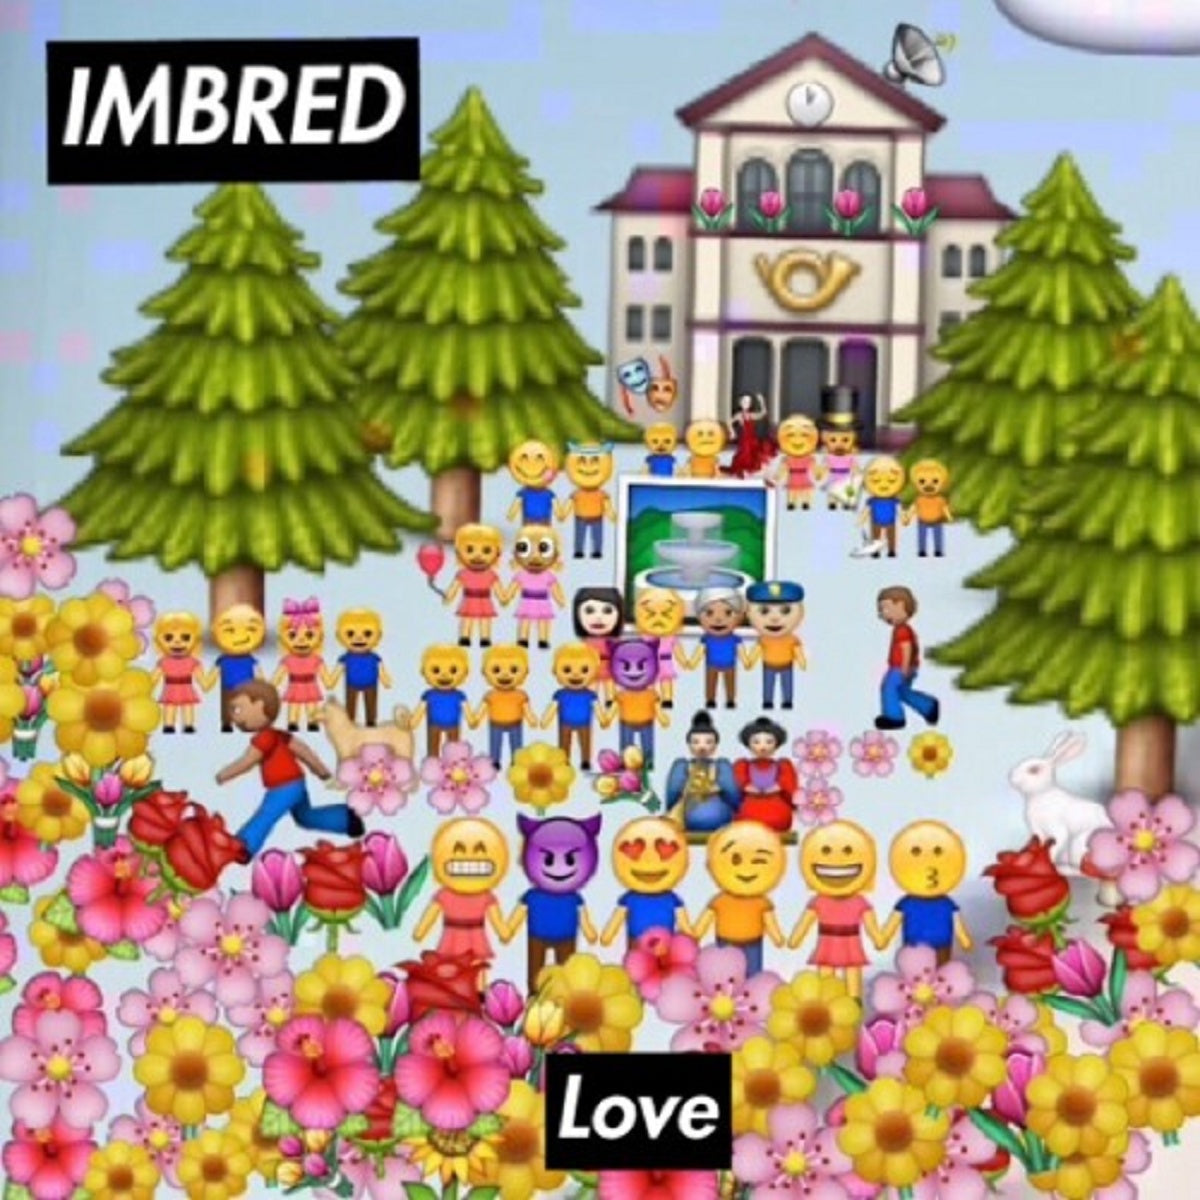 Imbred – ‘Love (Remastered)’